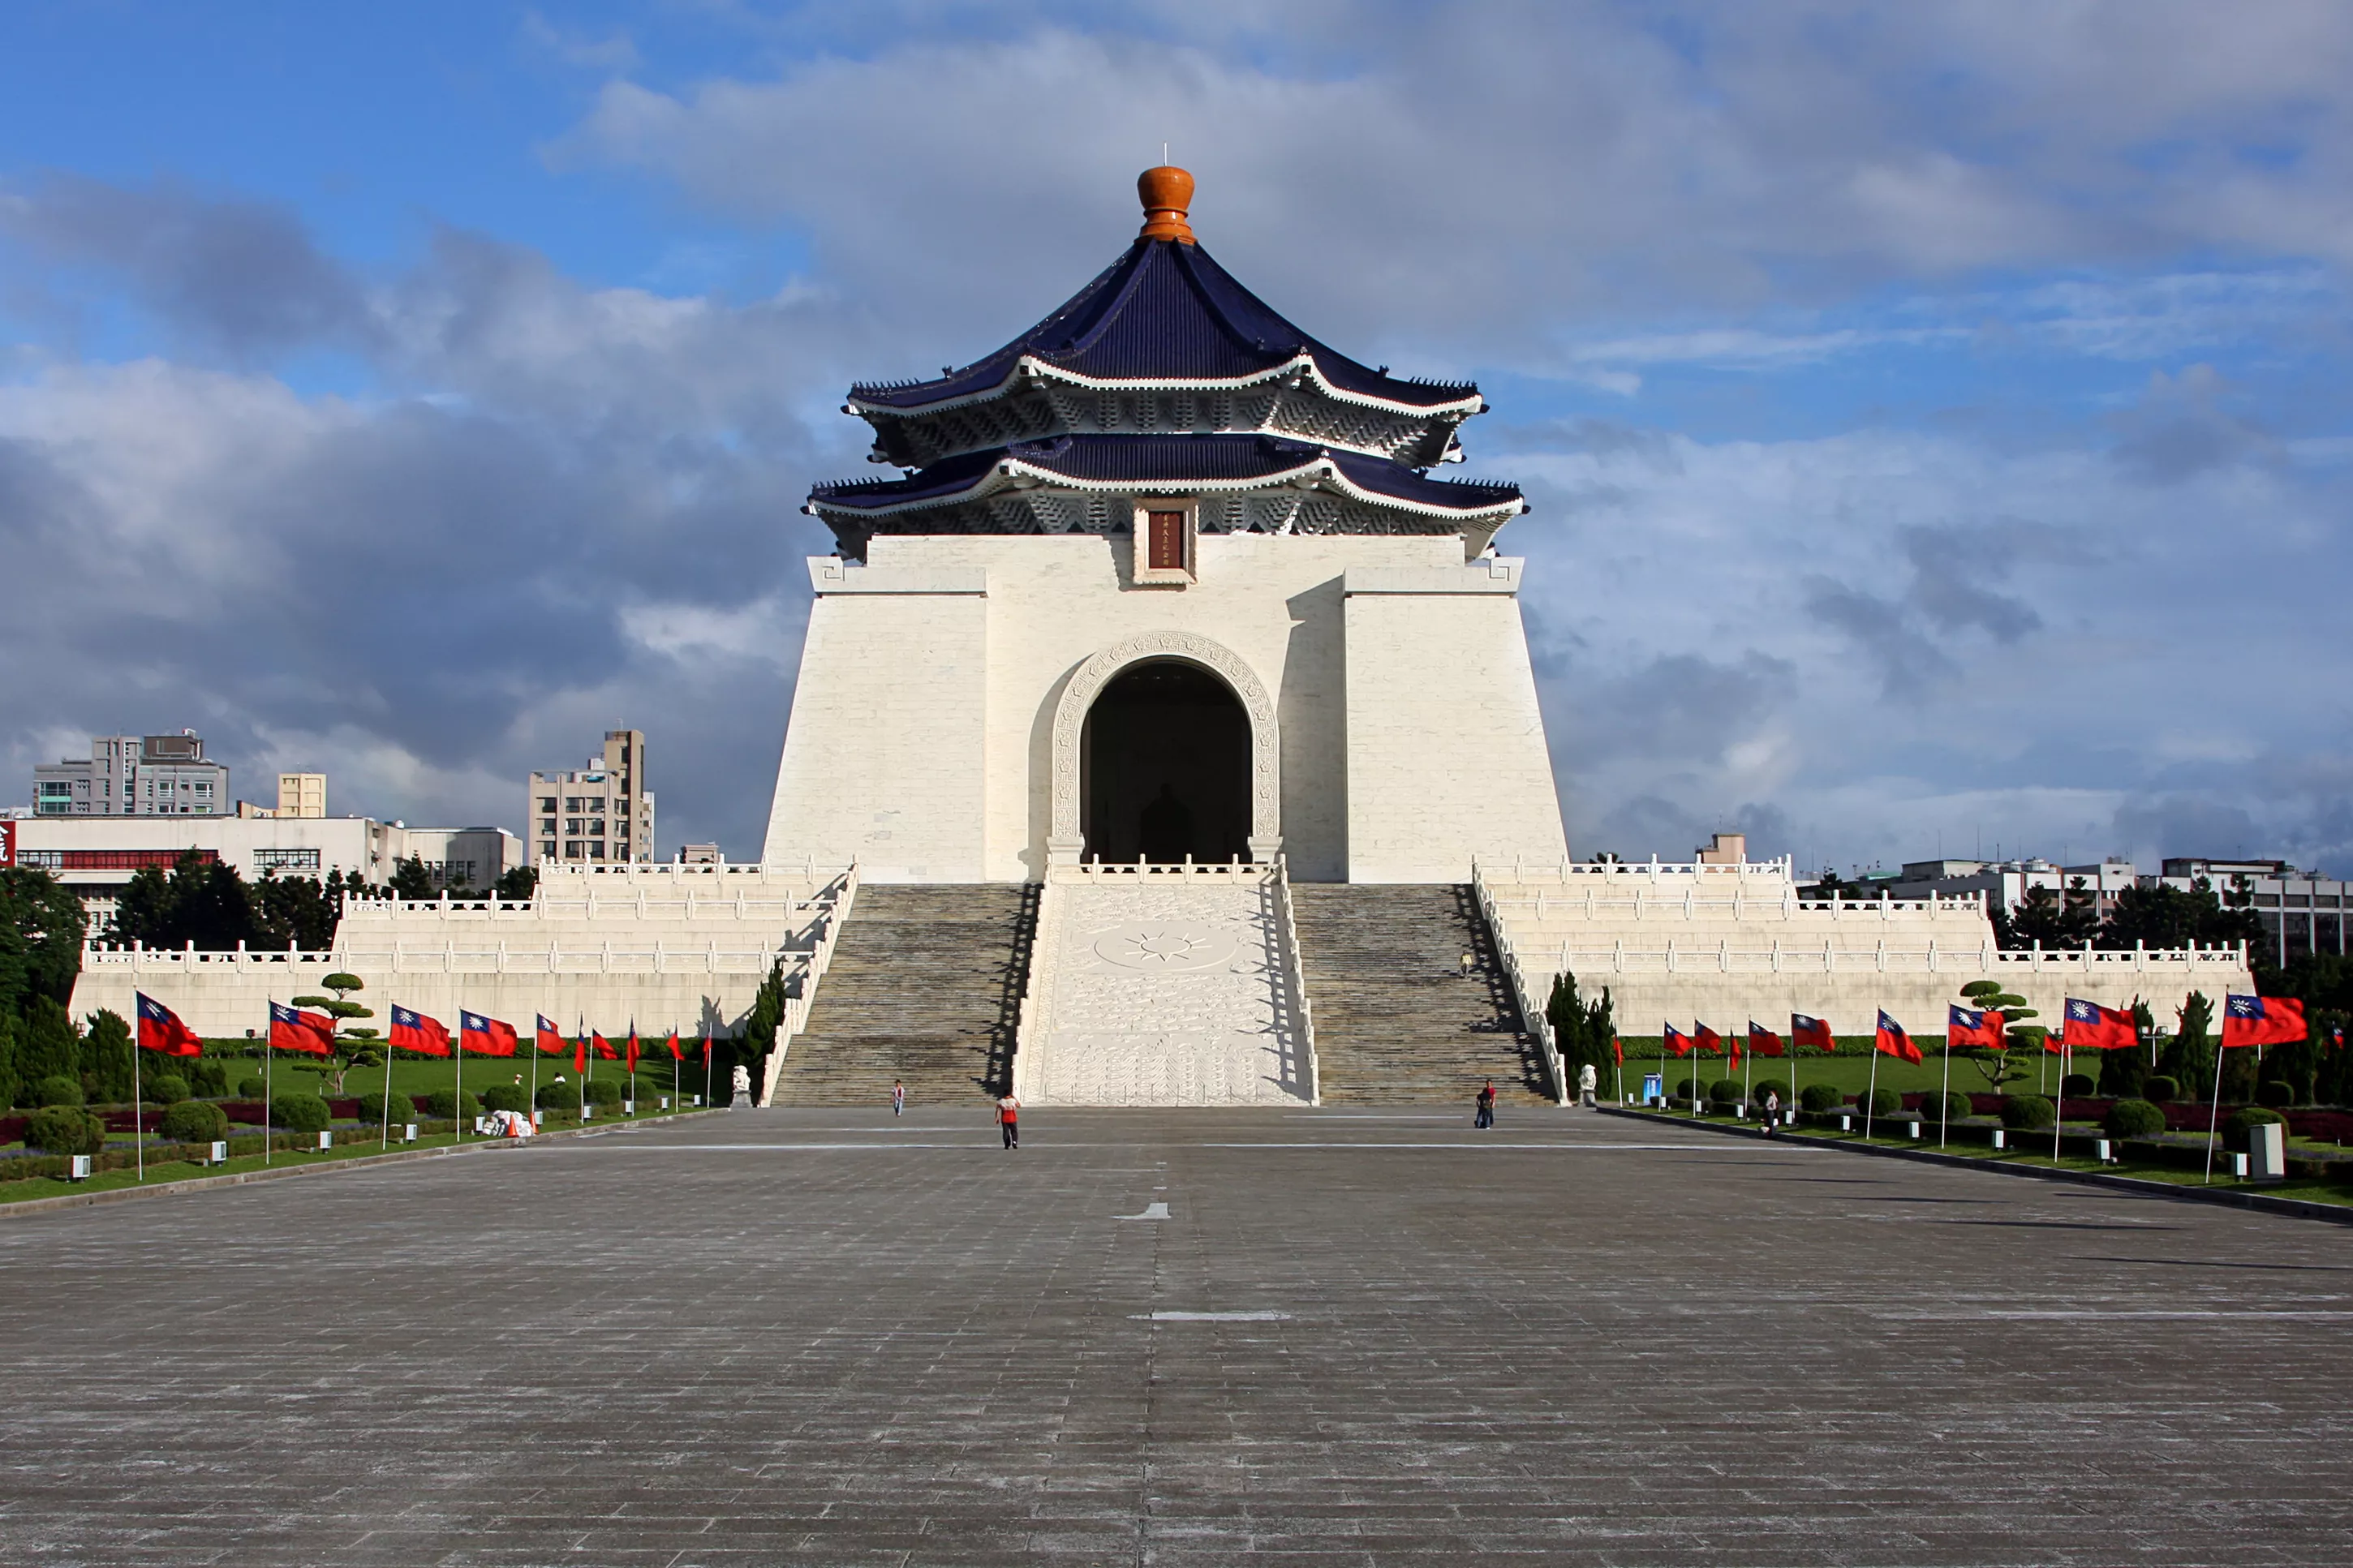 Chiang Kai-shek Memorial in Taiwan, East Asia | Architecture - Rated 4.8